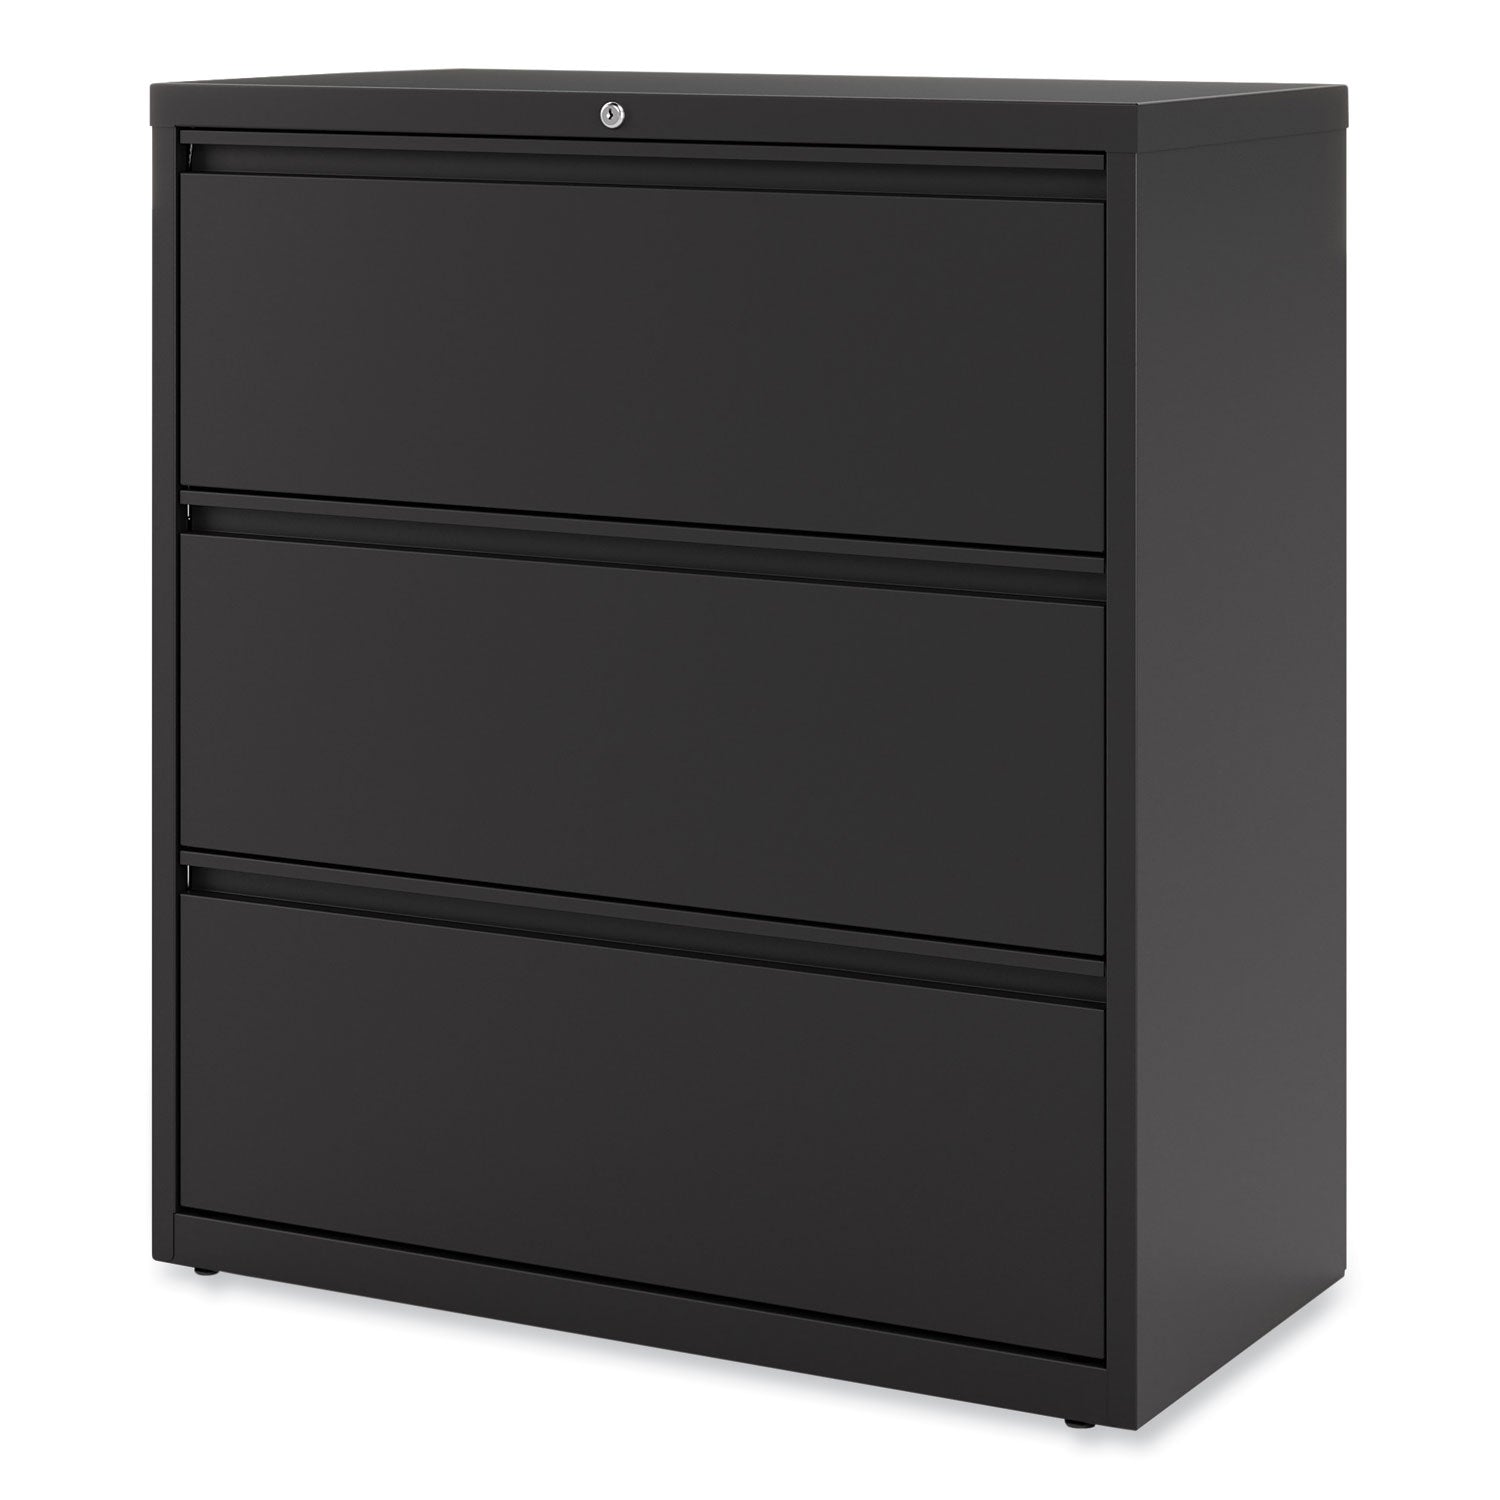 lateral-file-3-legal-letter-a4-a5-size-file-drawers-black-36-x-1863-x-4025_alehlf3641bl - 8